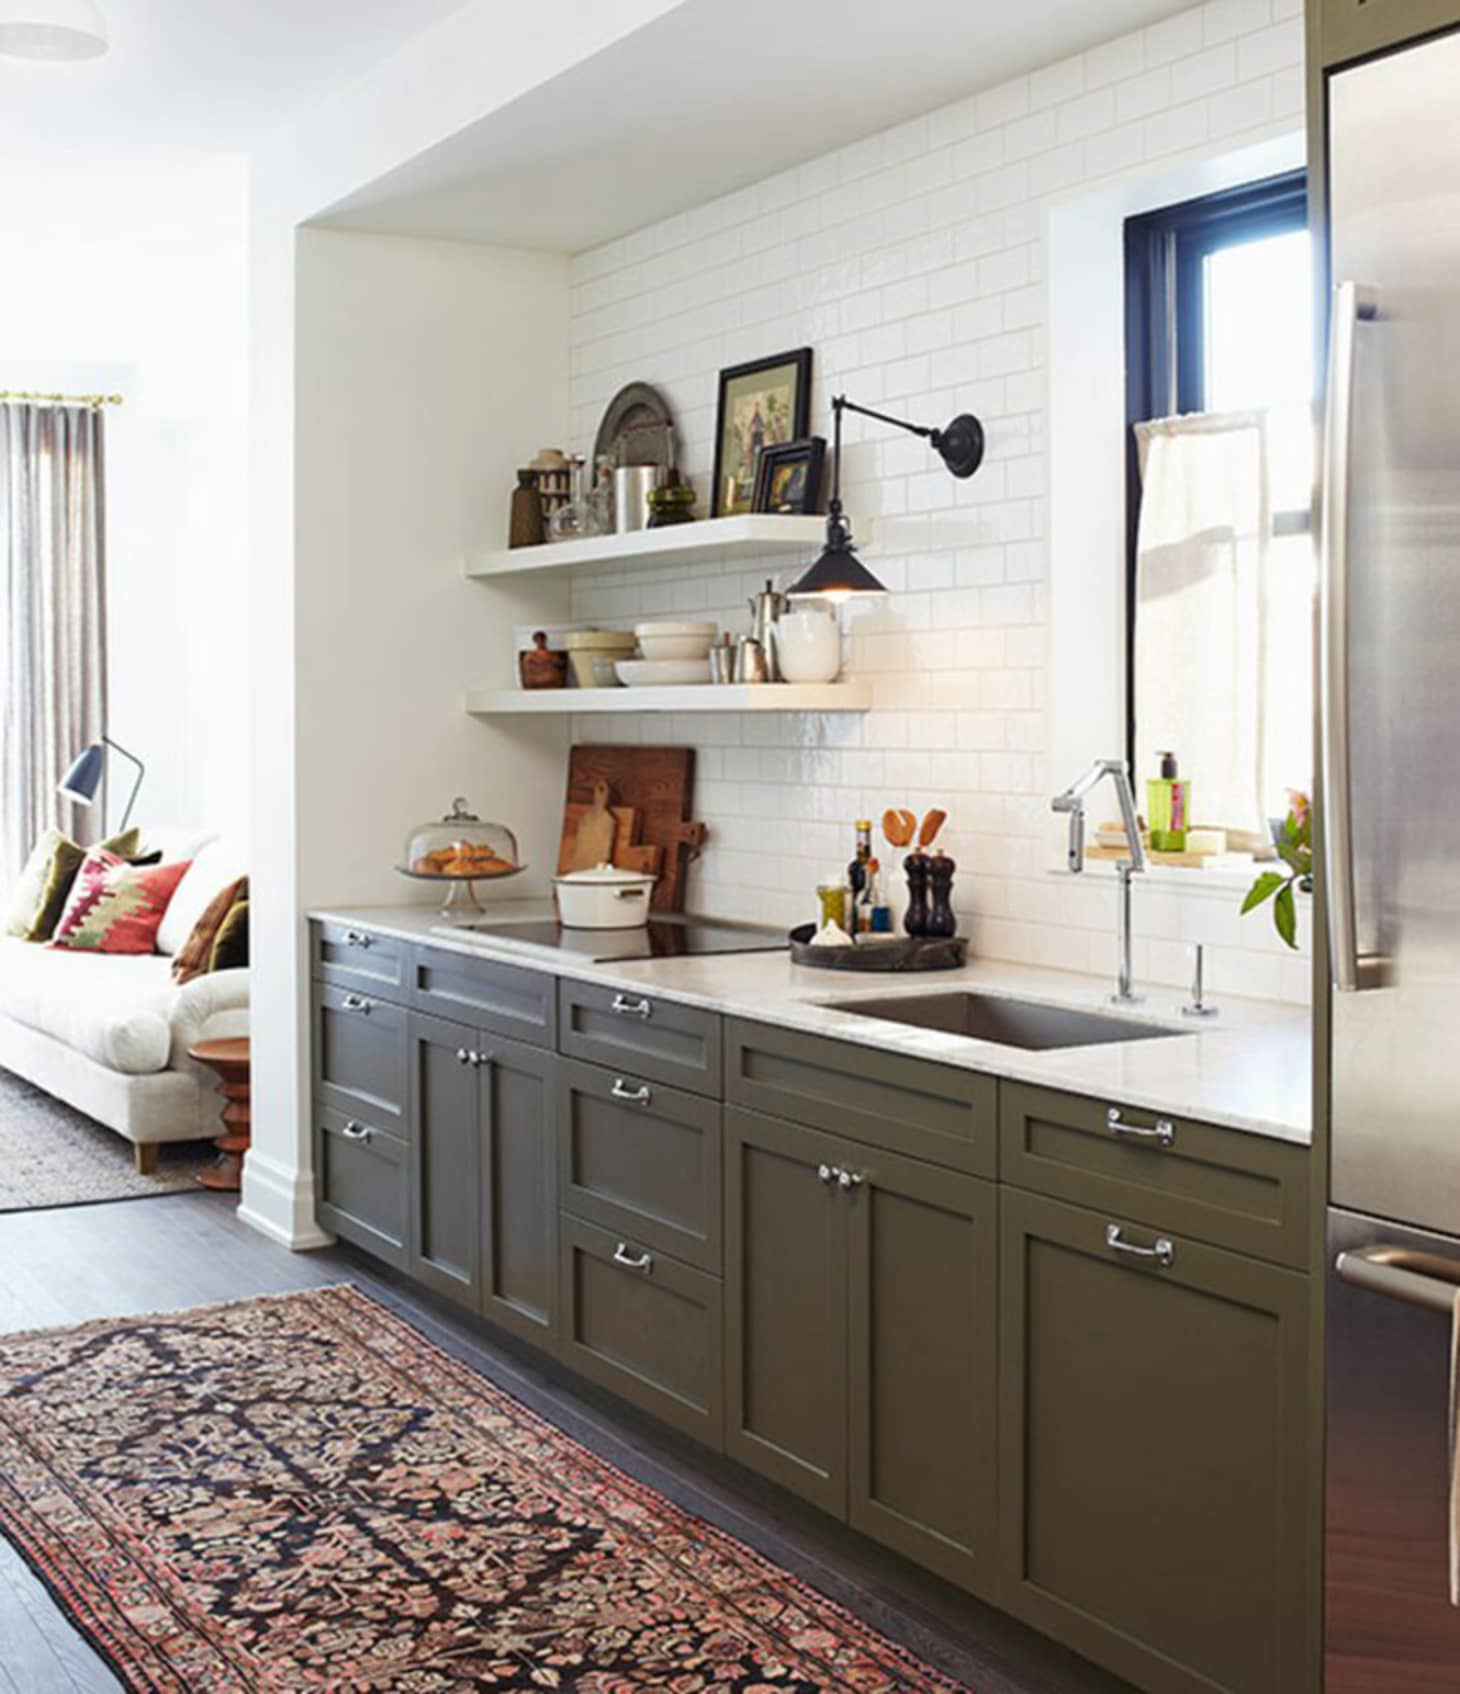 Green Painted Kitchen Cabinets We Love Right Now Apartment Therapy